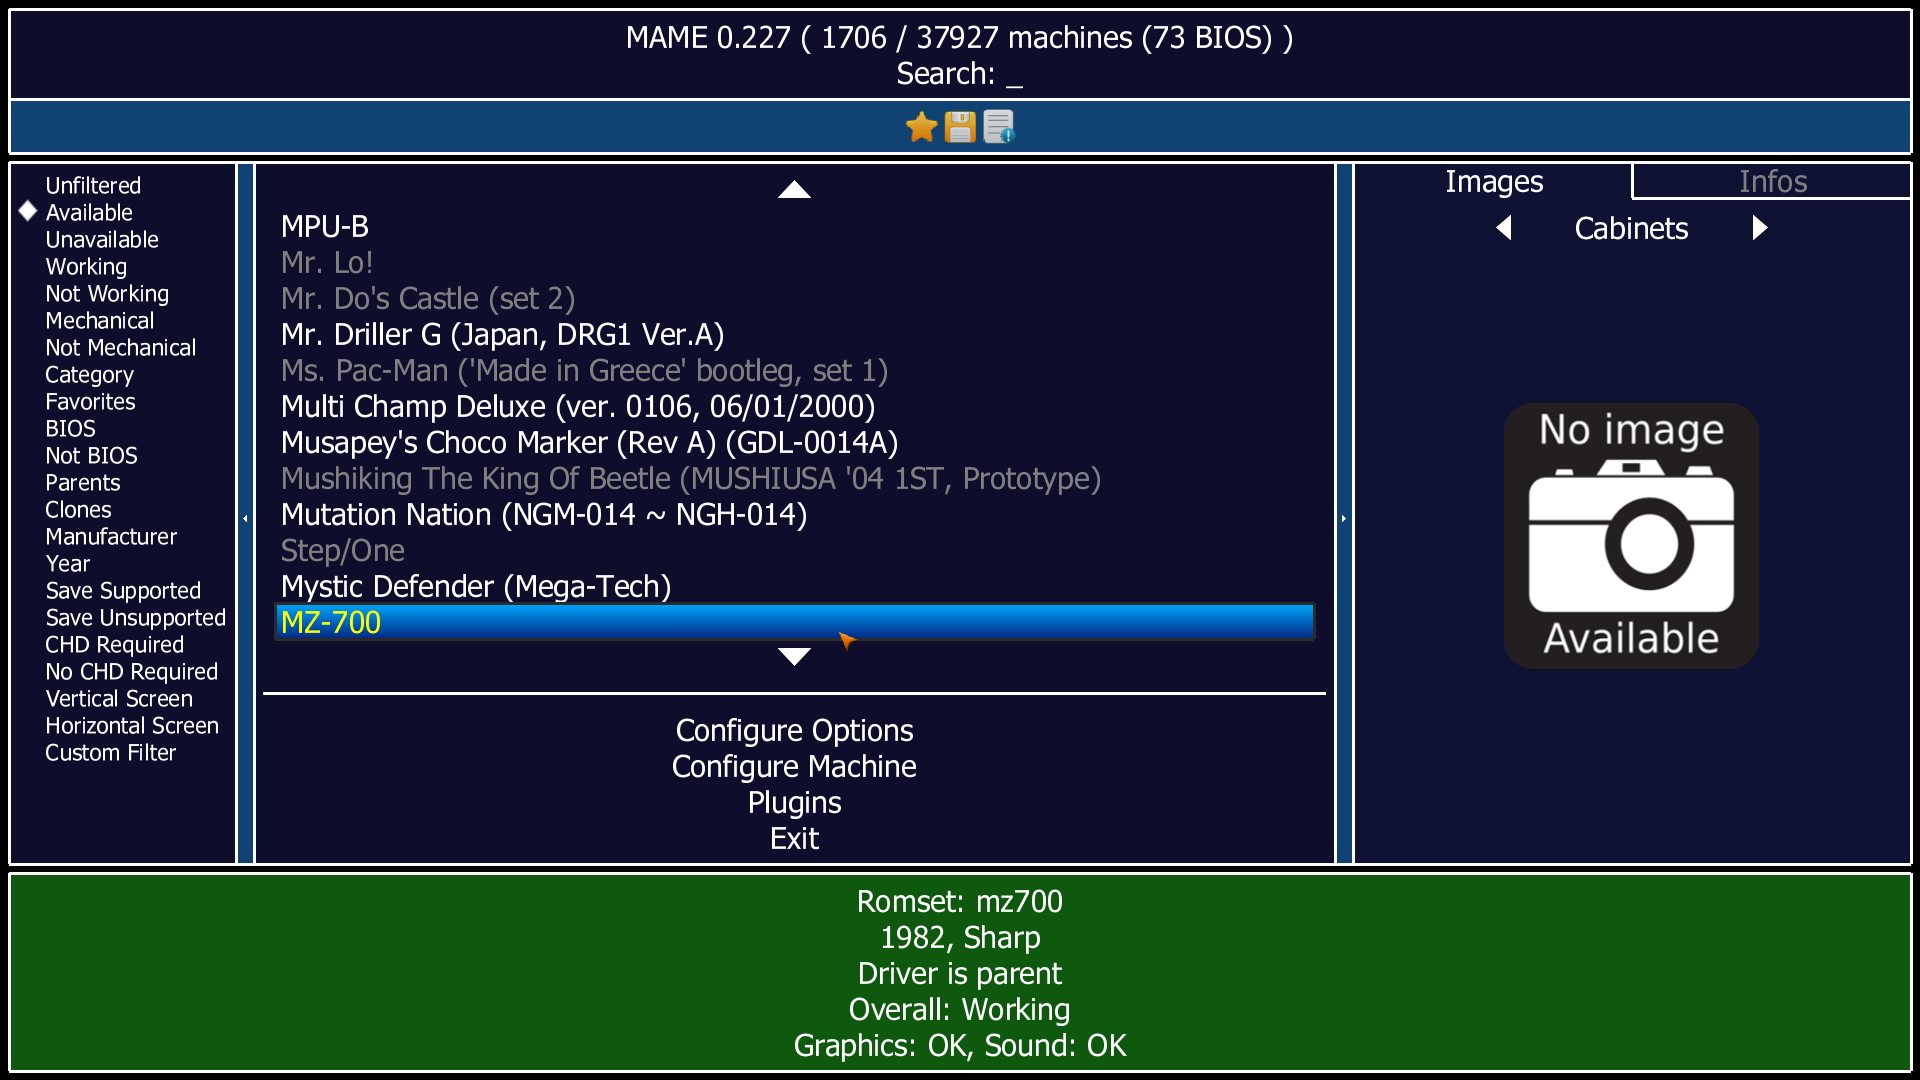 Download Every MAME ROM Pack for Games and Systems 0.227